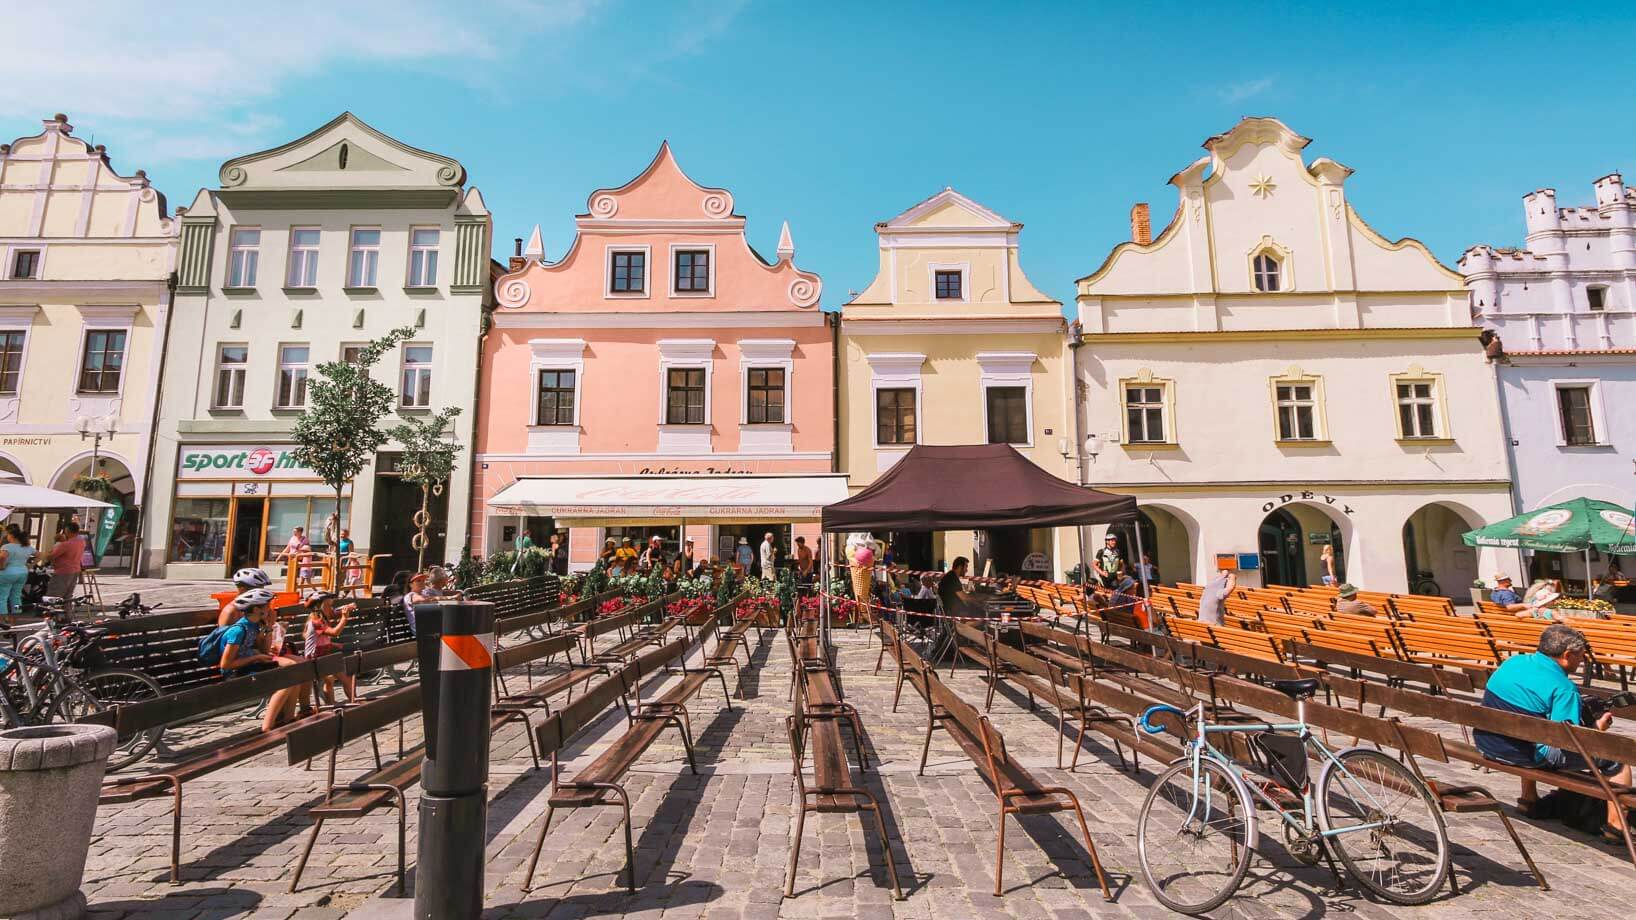 Masaryk Square - How To Spend A Day in Trebon Czech Republic